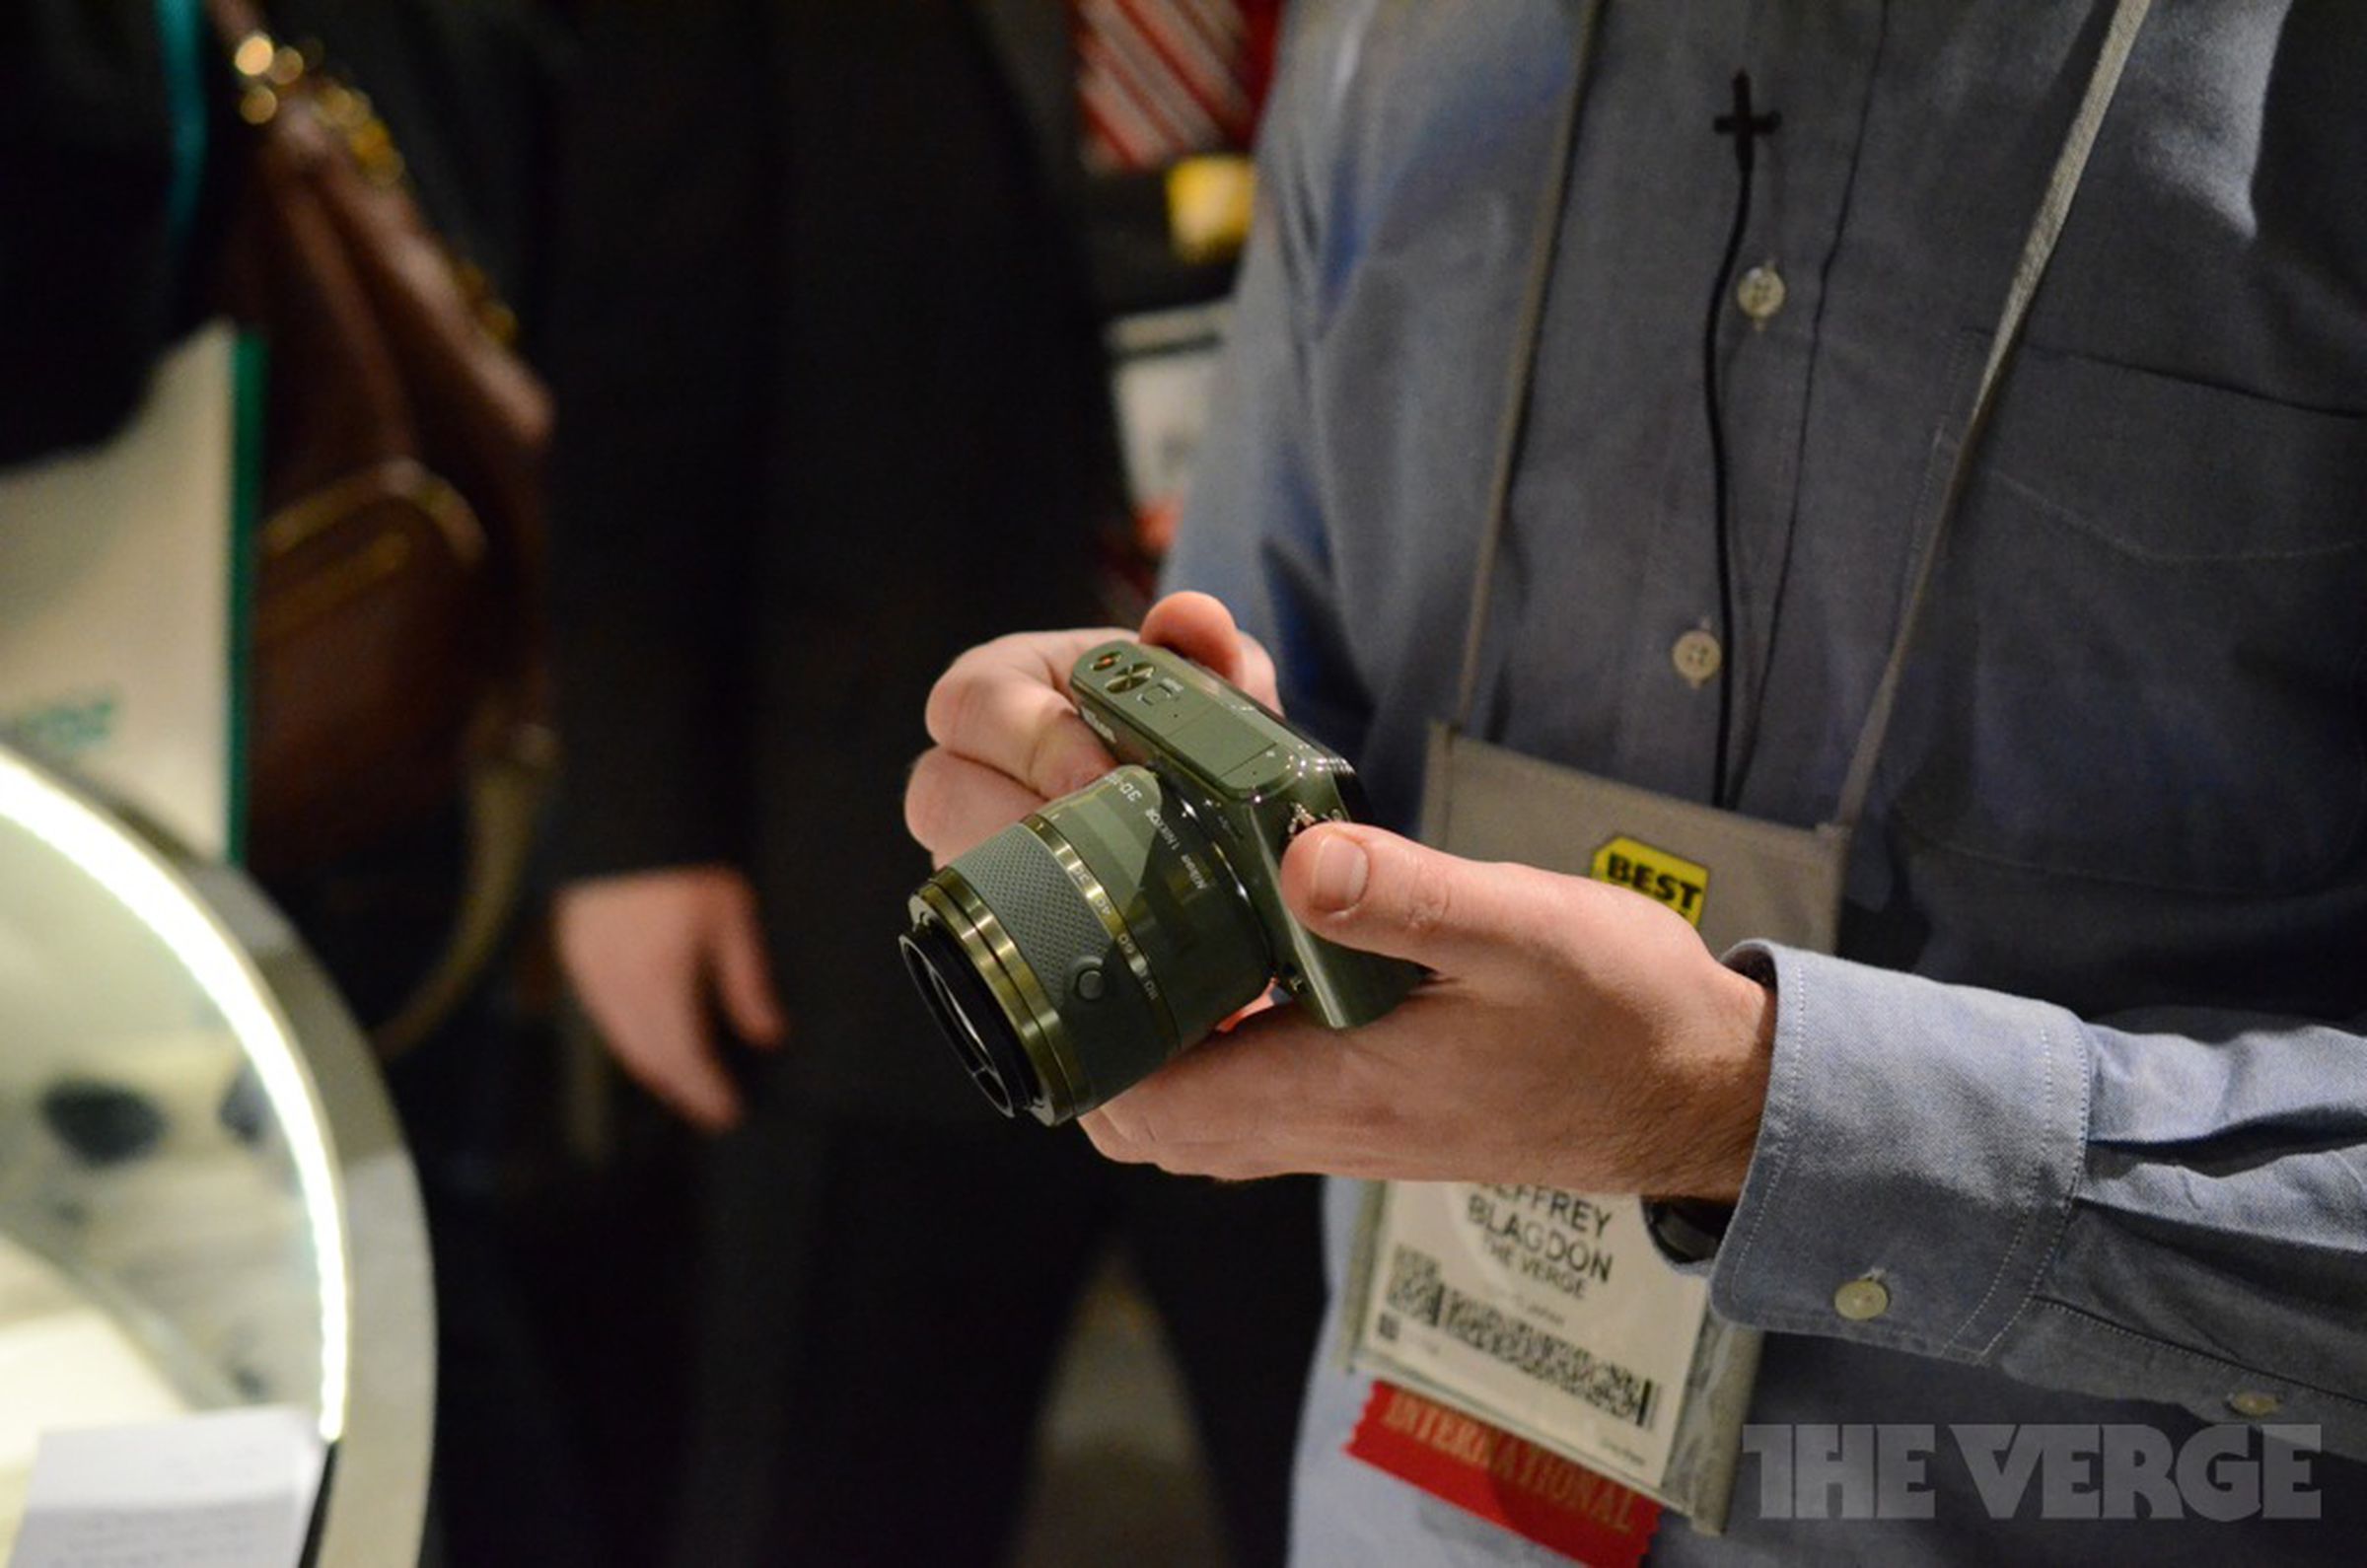 Nikon J3 and S1 camera hands-on